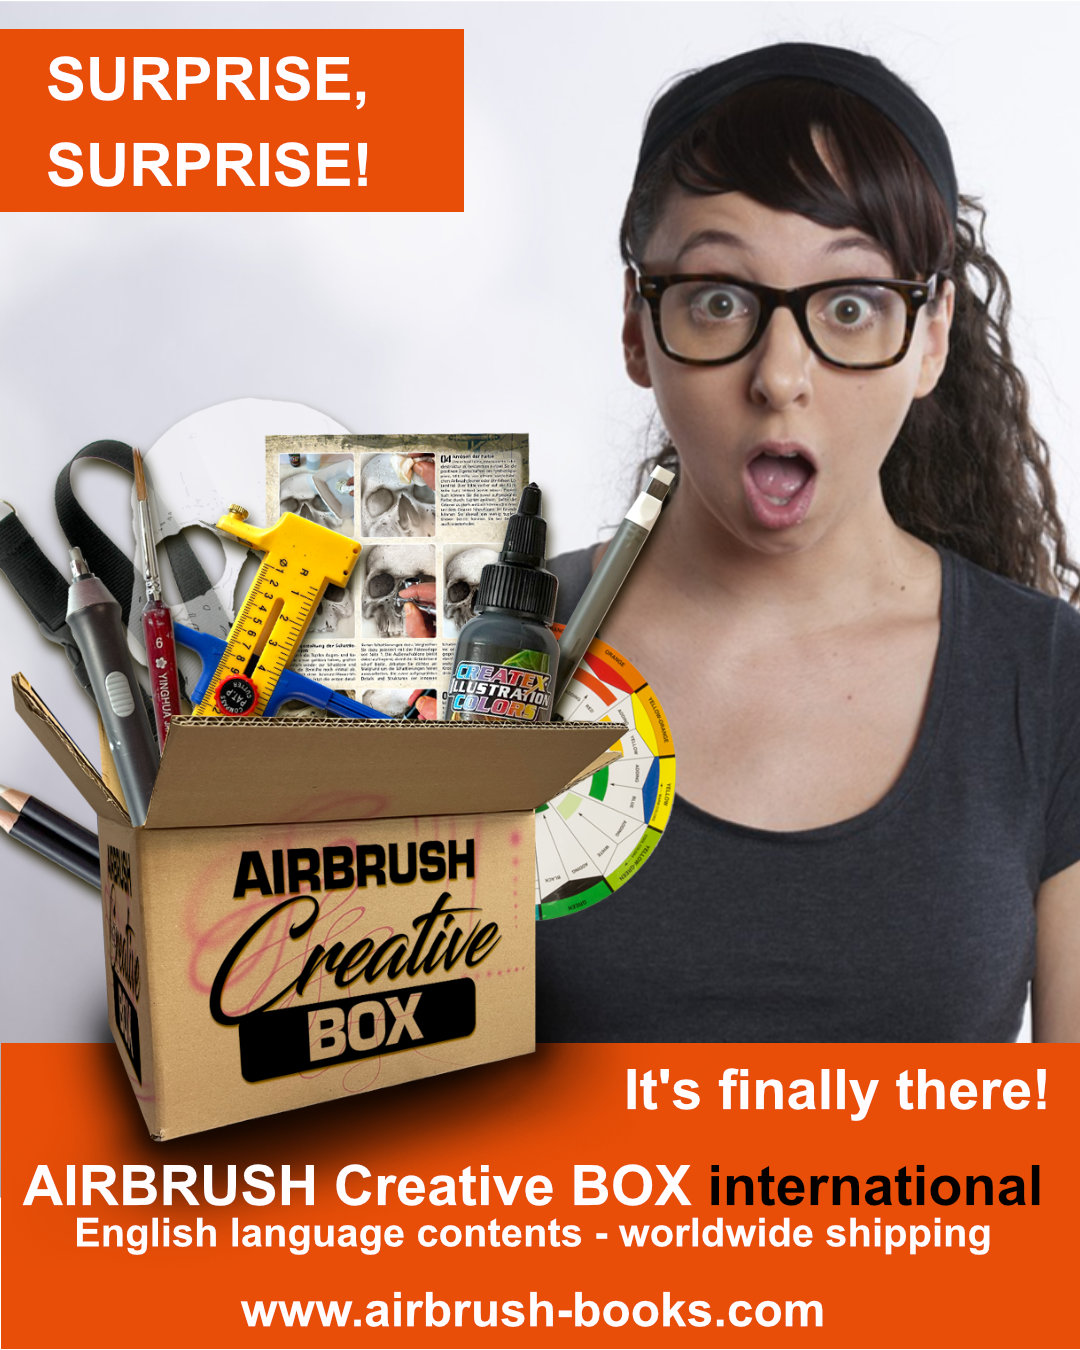 Surprise, Surprise! Airbrush Creative Box is here